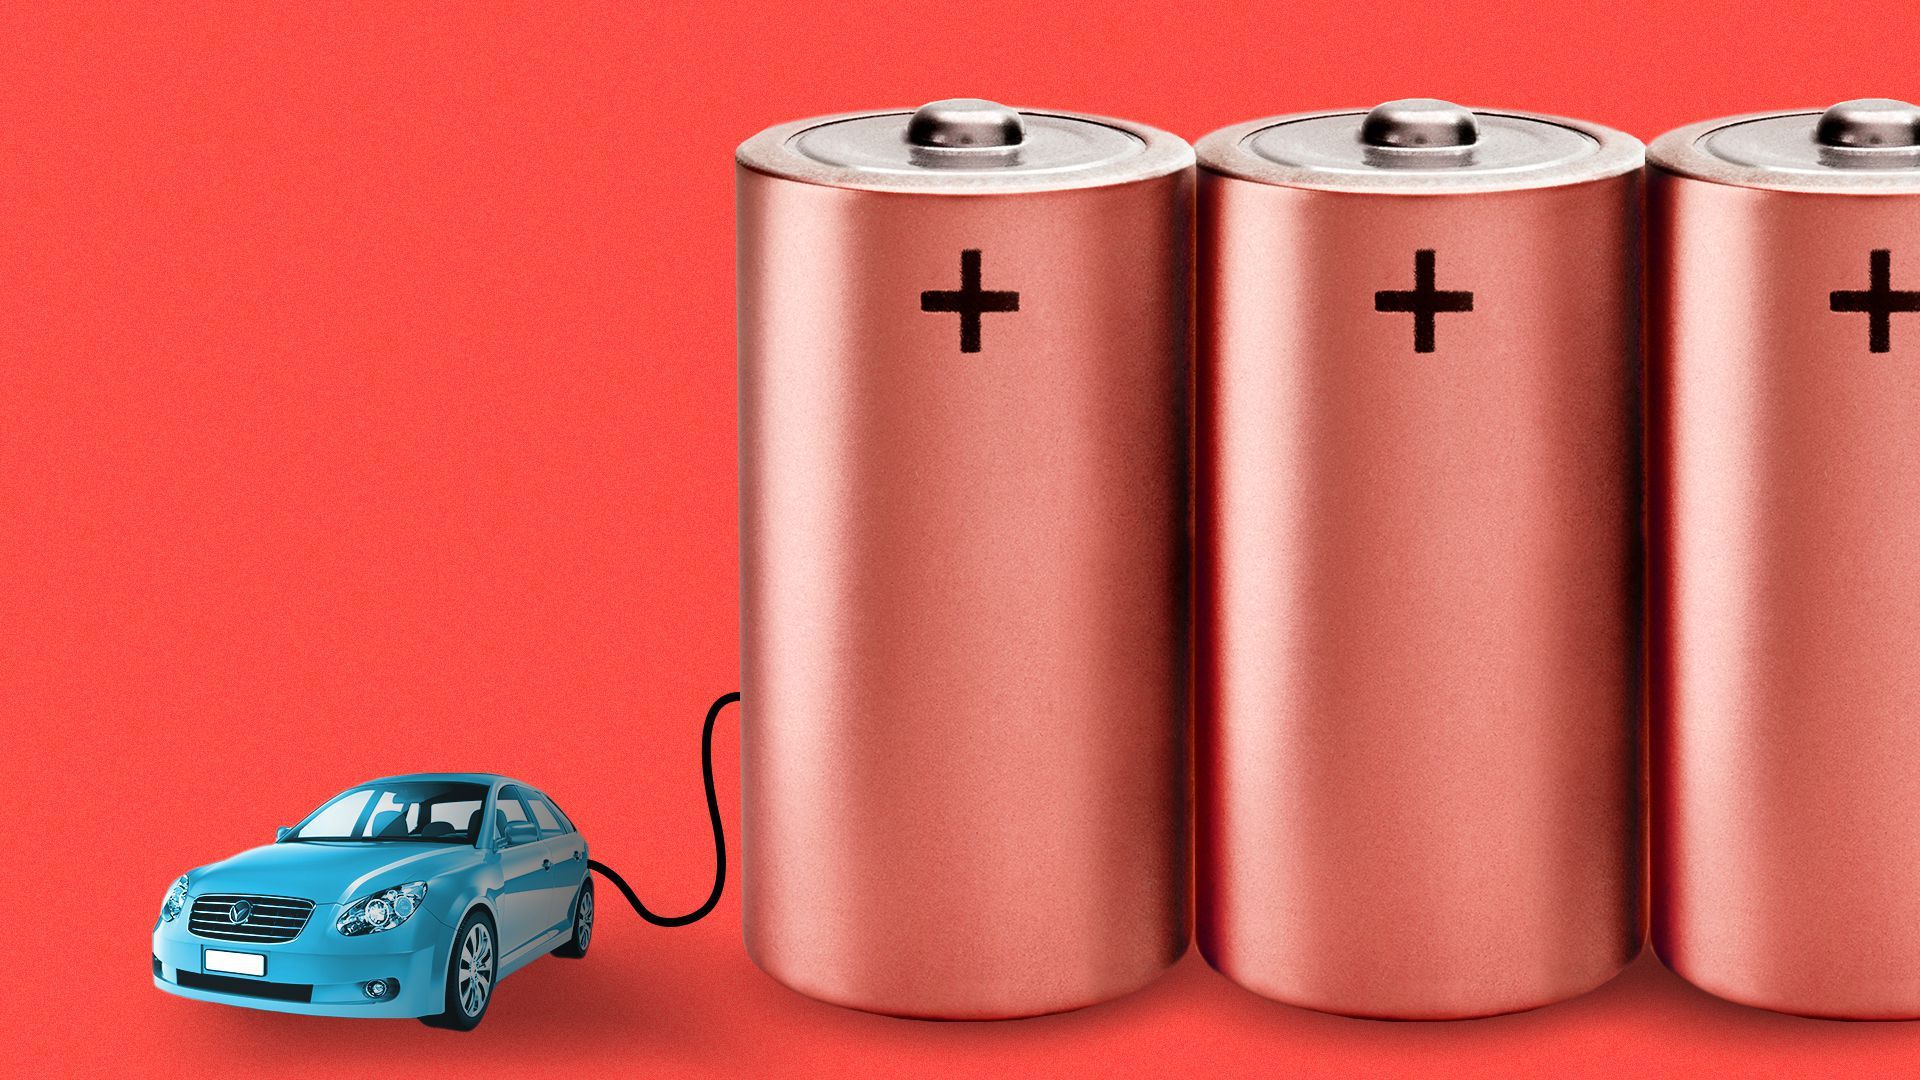 Illustration of a car plugged into a huge battery.